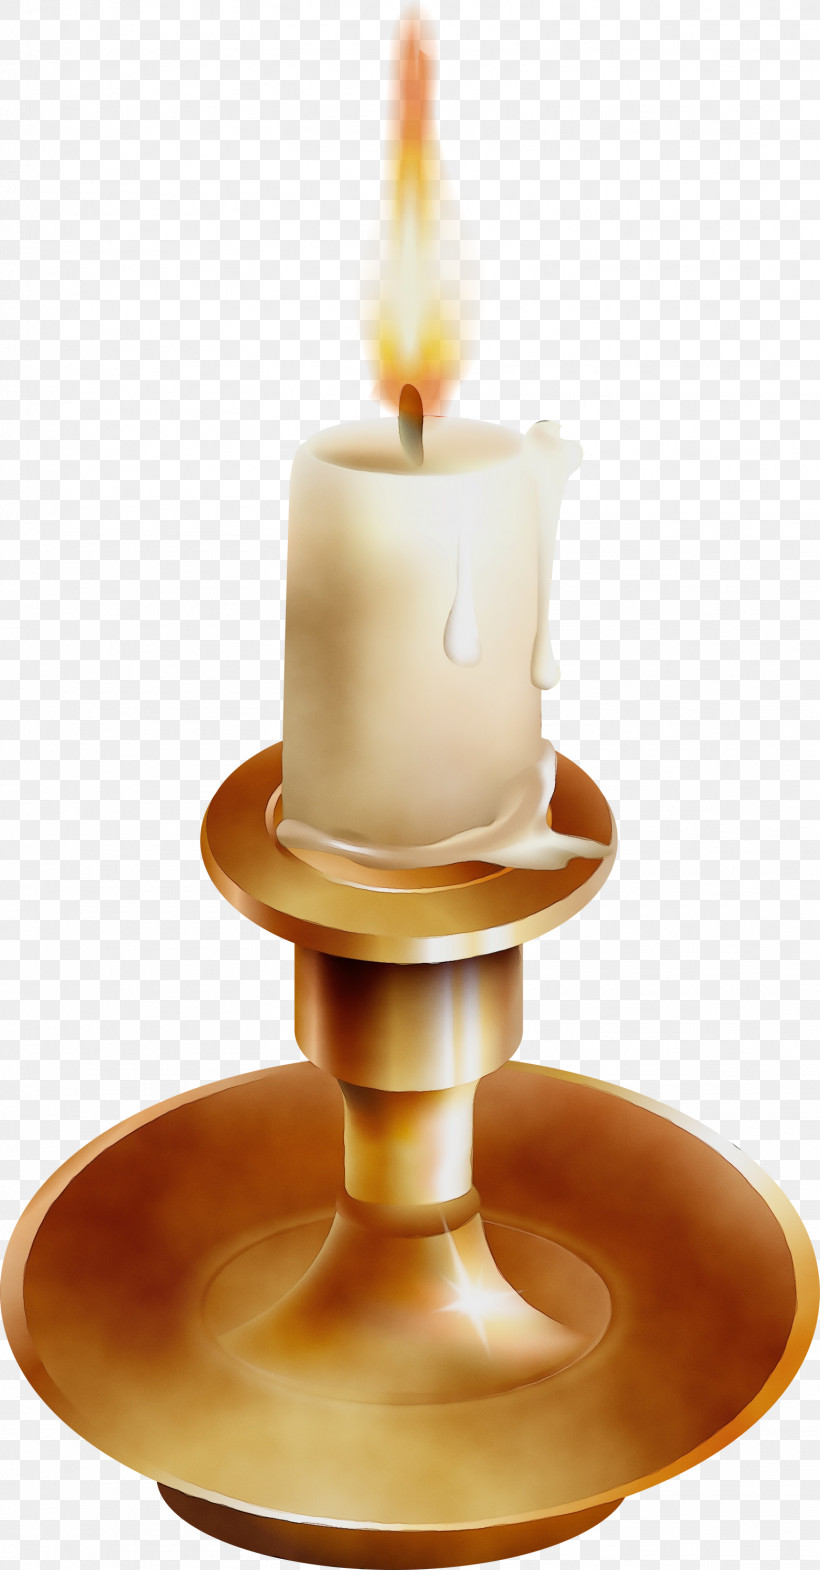 Candle Lighting Candle Holder Oil Lamp Wax, PNG, 1566x3000px, Watercolor, Candle, Candle Holder, Interior Design, Lighting Download Free